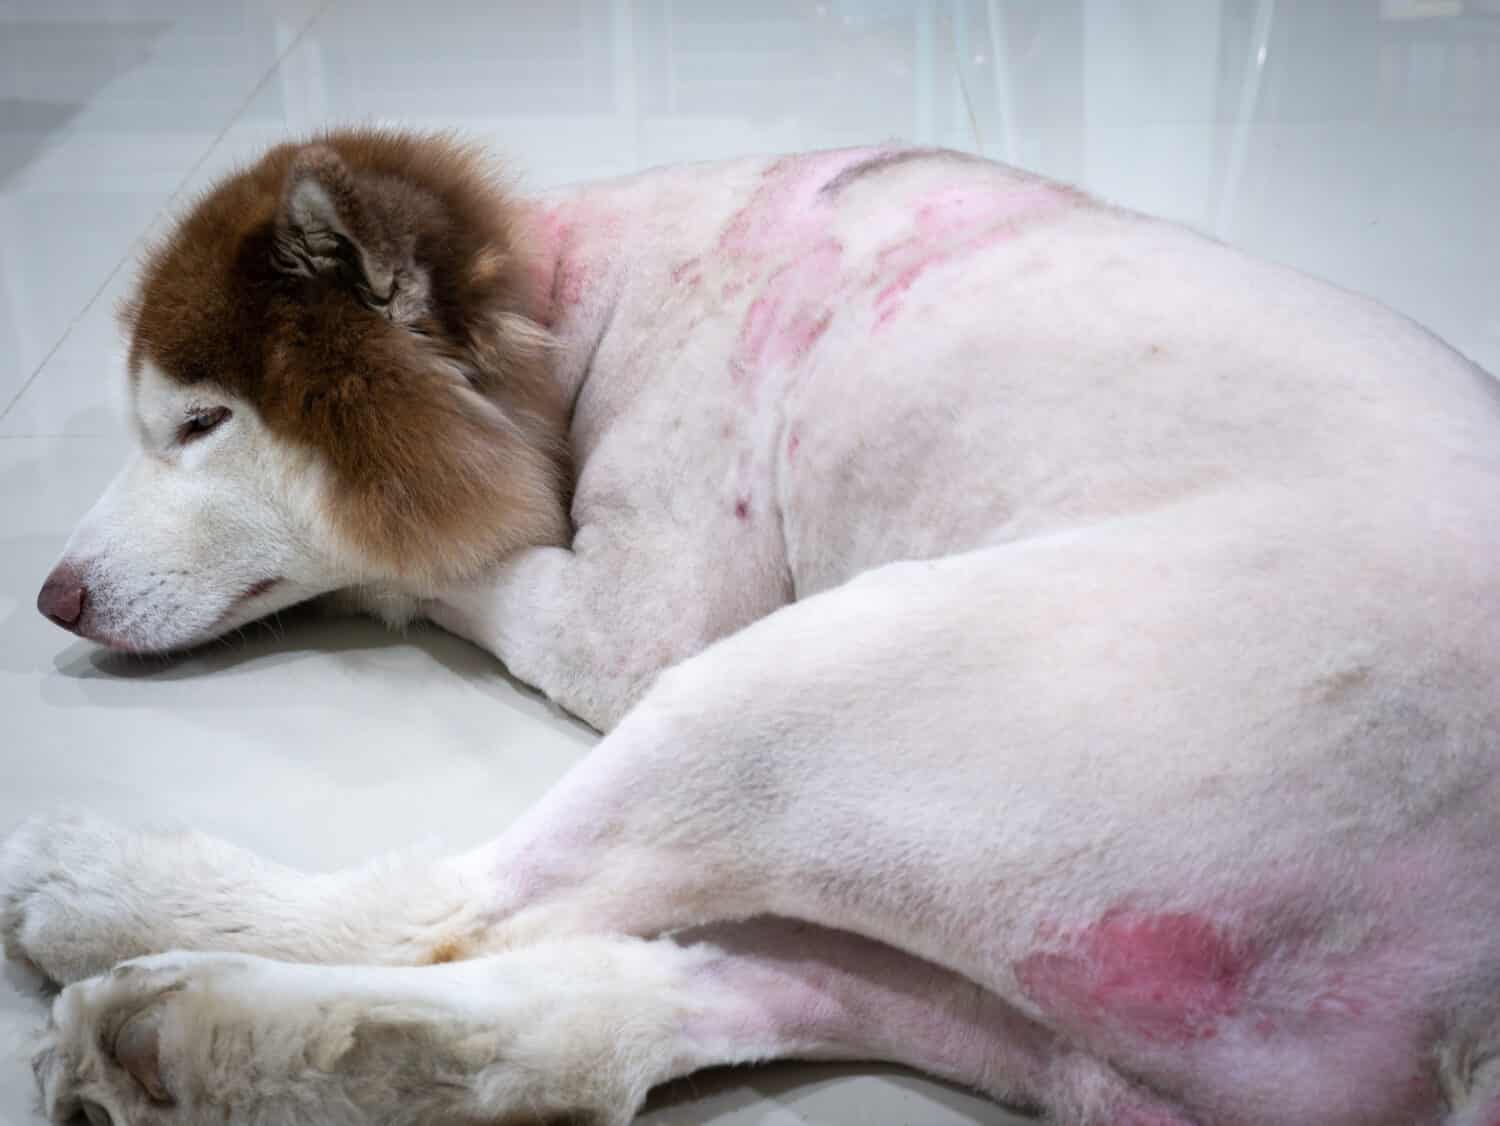 The Skin Disease of The Siberian Husky Dog,The Dog was Cut Hairs around The Body